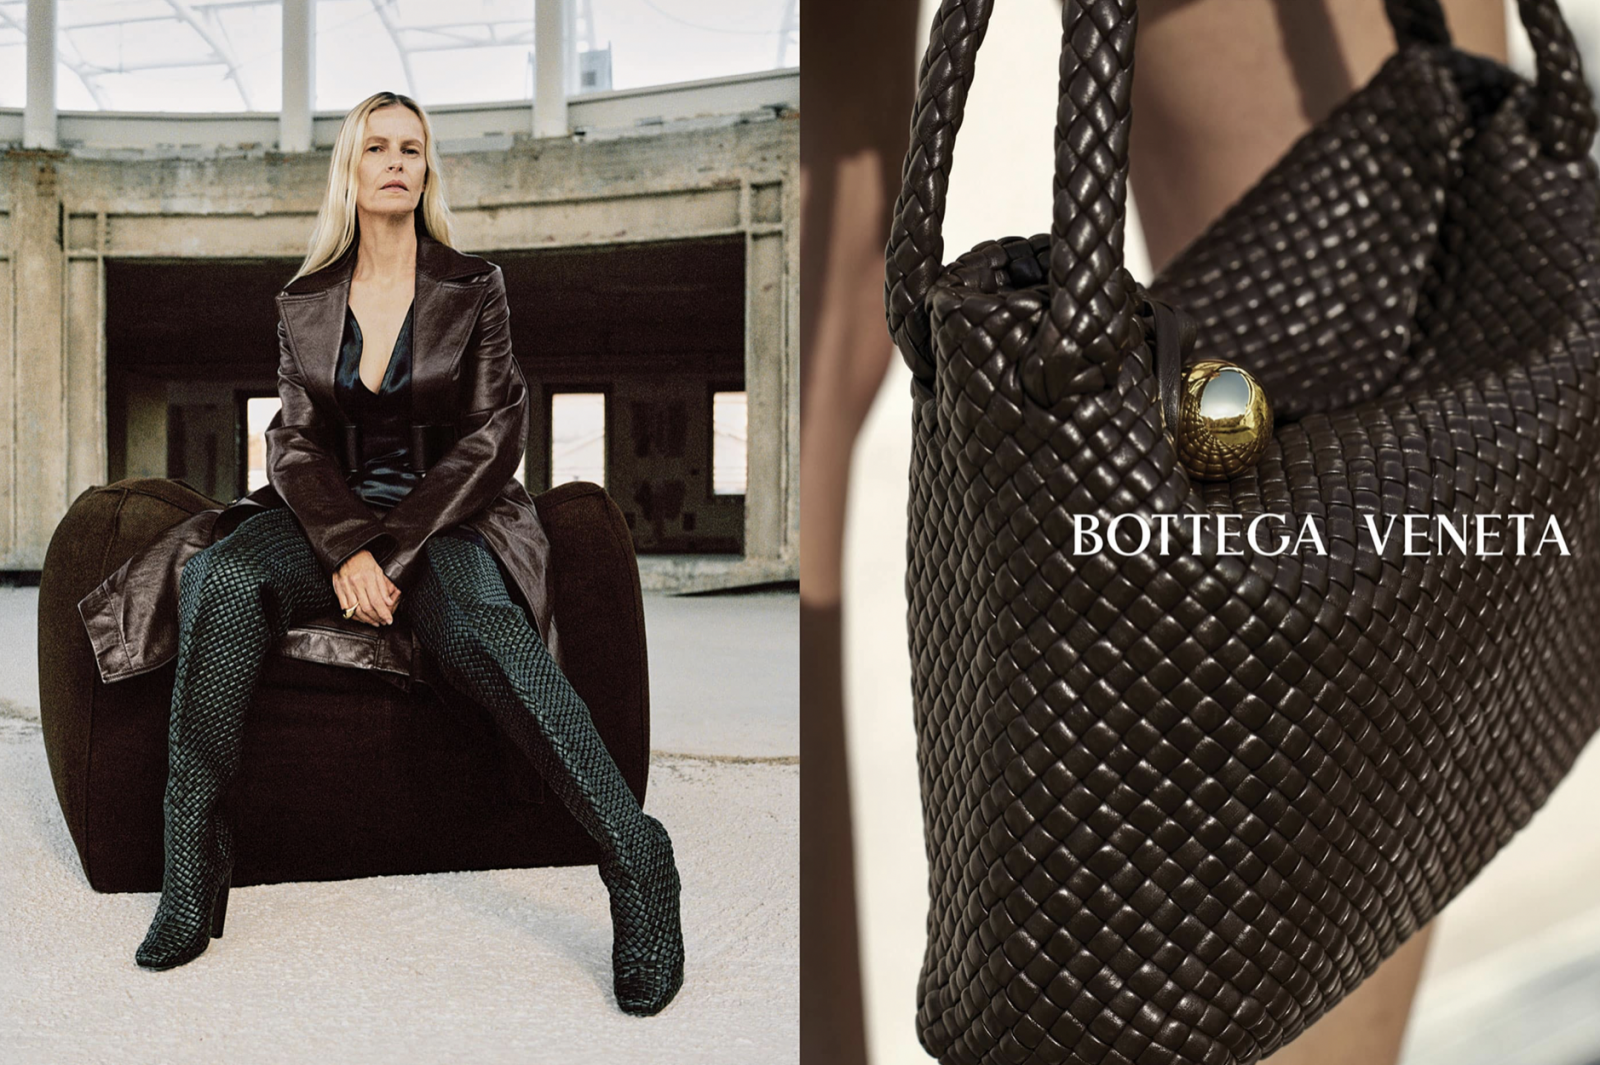 Can Bottega Veneta's Daniel Lee Go Beyond the It Bag? Or Better Yet   Does He Need to? - The Fashion Law